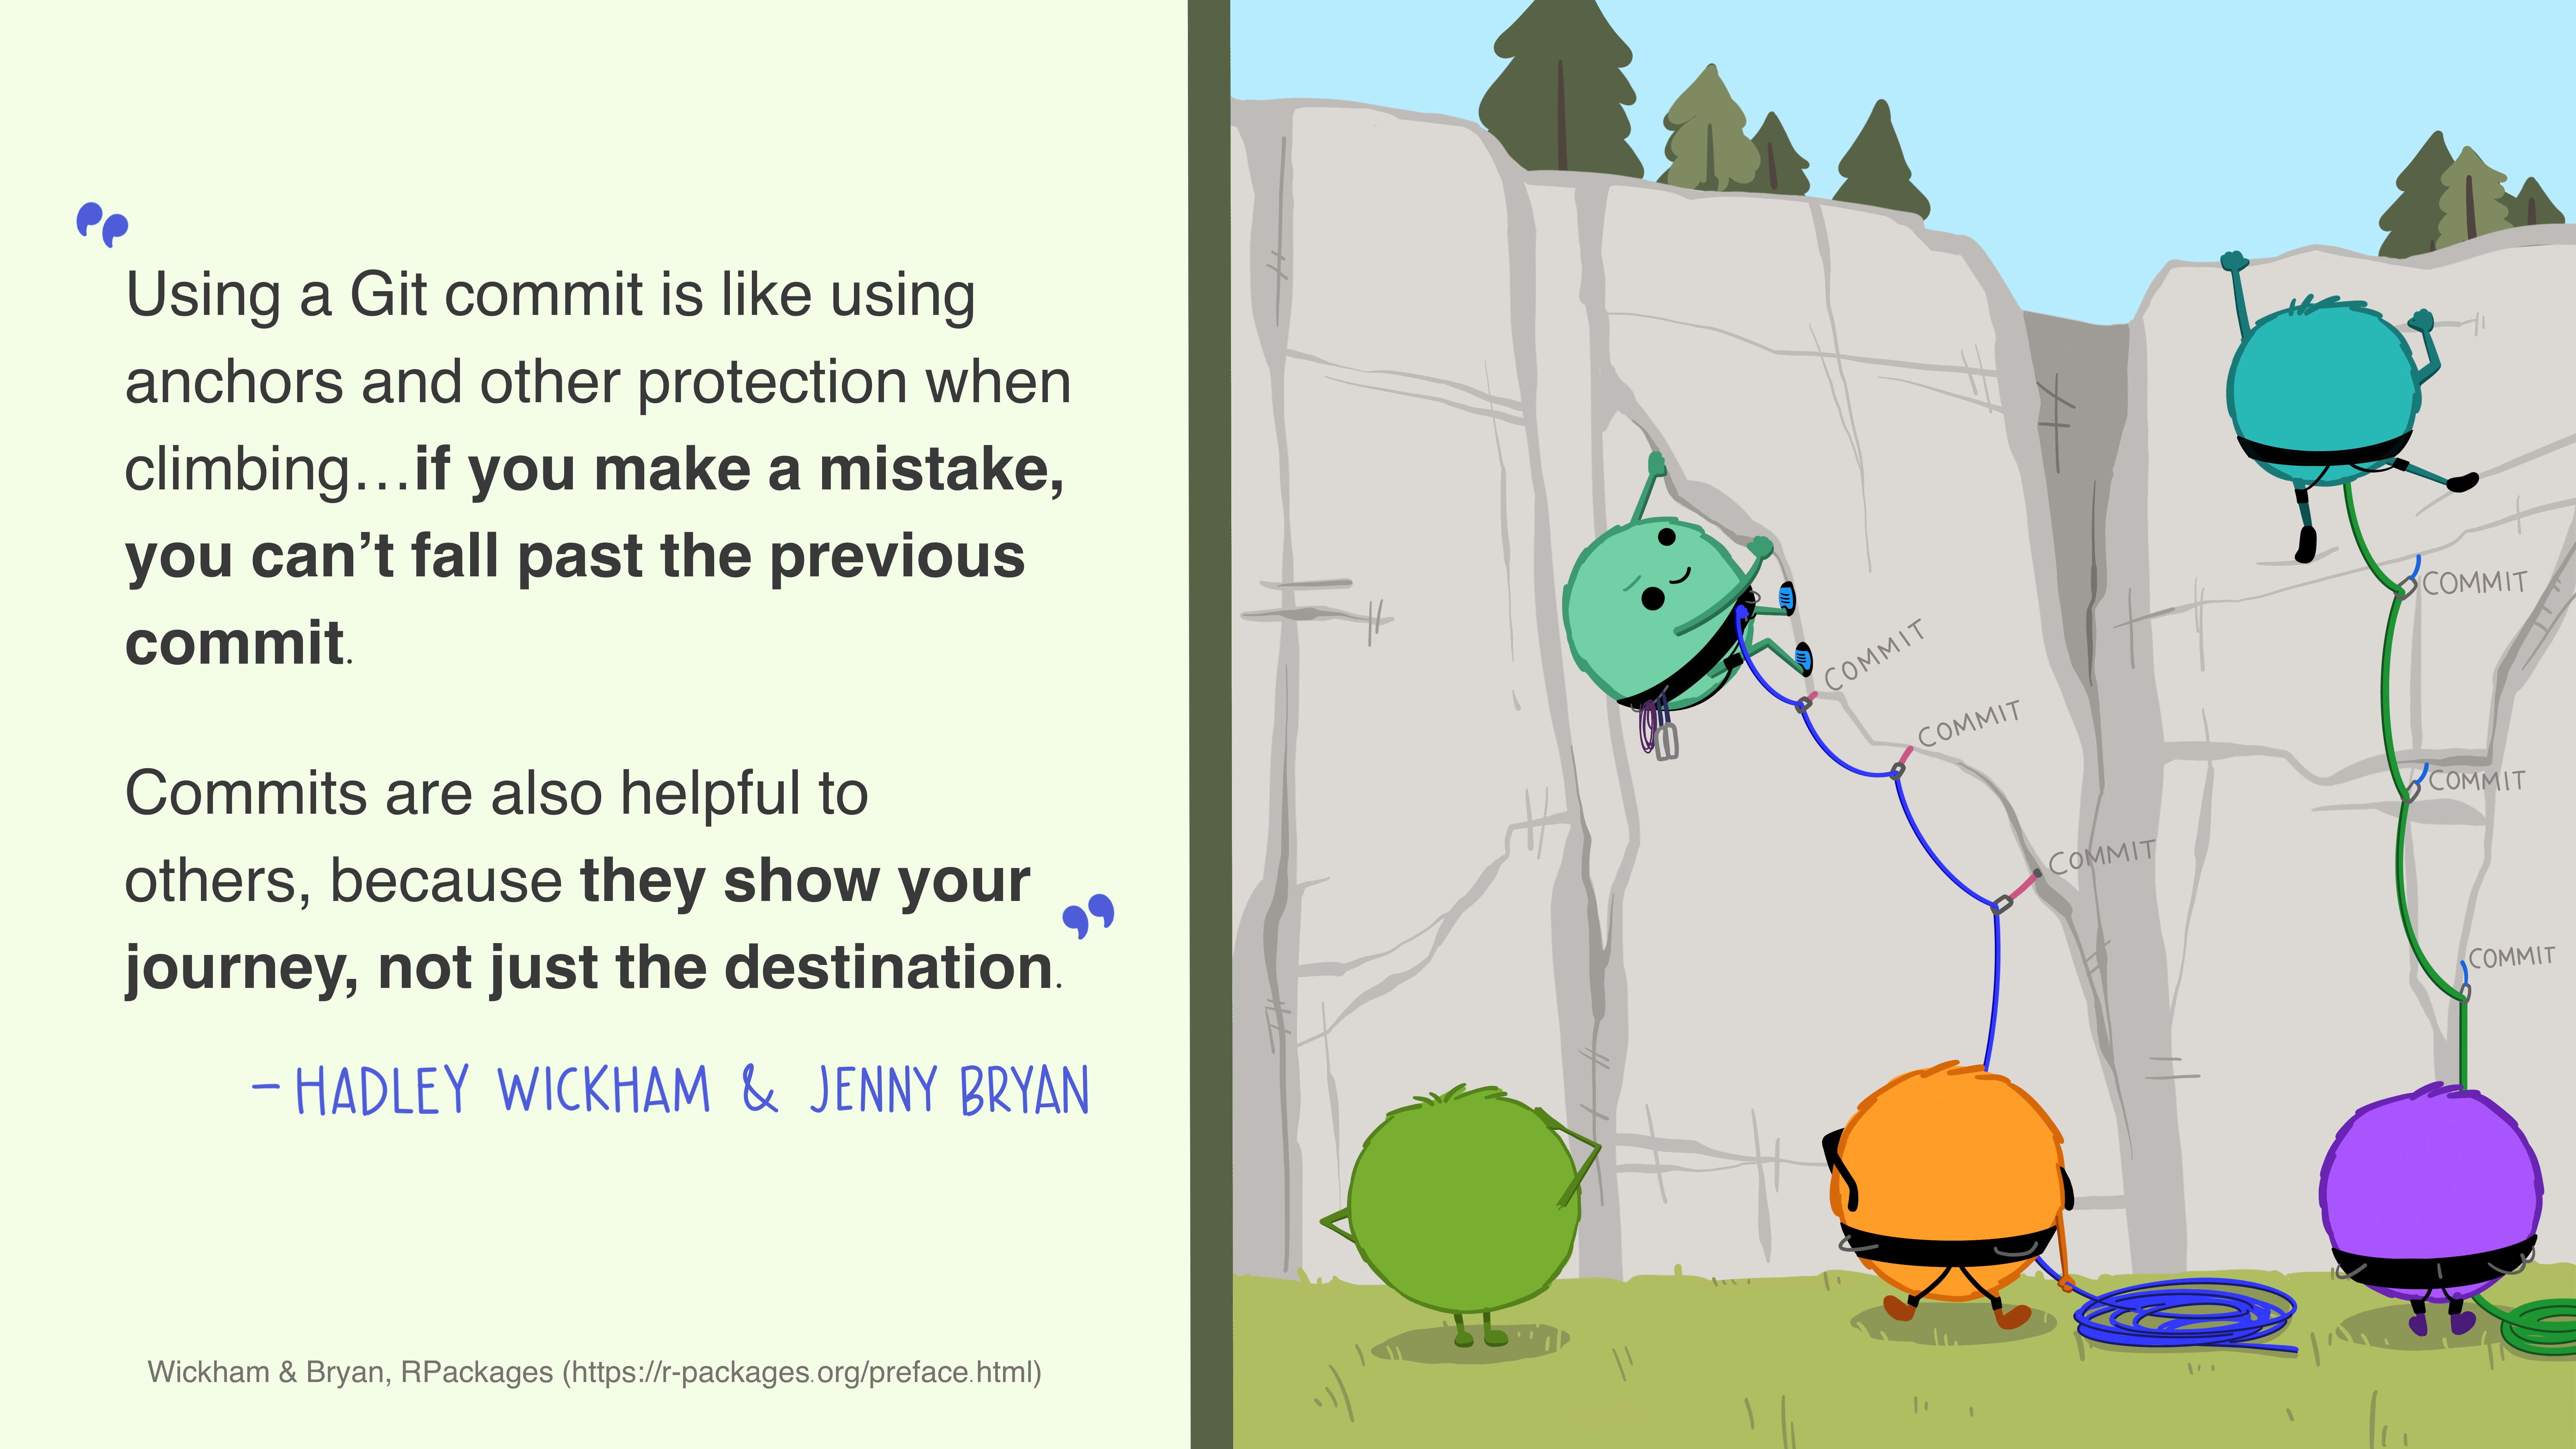 On the left is a quote from Hadley Wickham and Jenny Bryan that says 'Using a Git commit is like using anchors and other protection when climbing...if you make a mistake you can't fall past the previous commit. Commits are also helpful to others, because they show your journey, not just the destination.' On the right, two little monsters climb a cliff face. Their ropes are secured by several anchors, each labeled 'Commit'. Three monsters on the ground support the climbers.